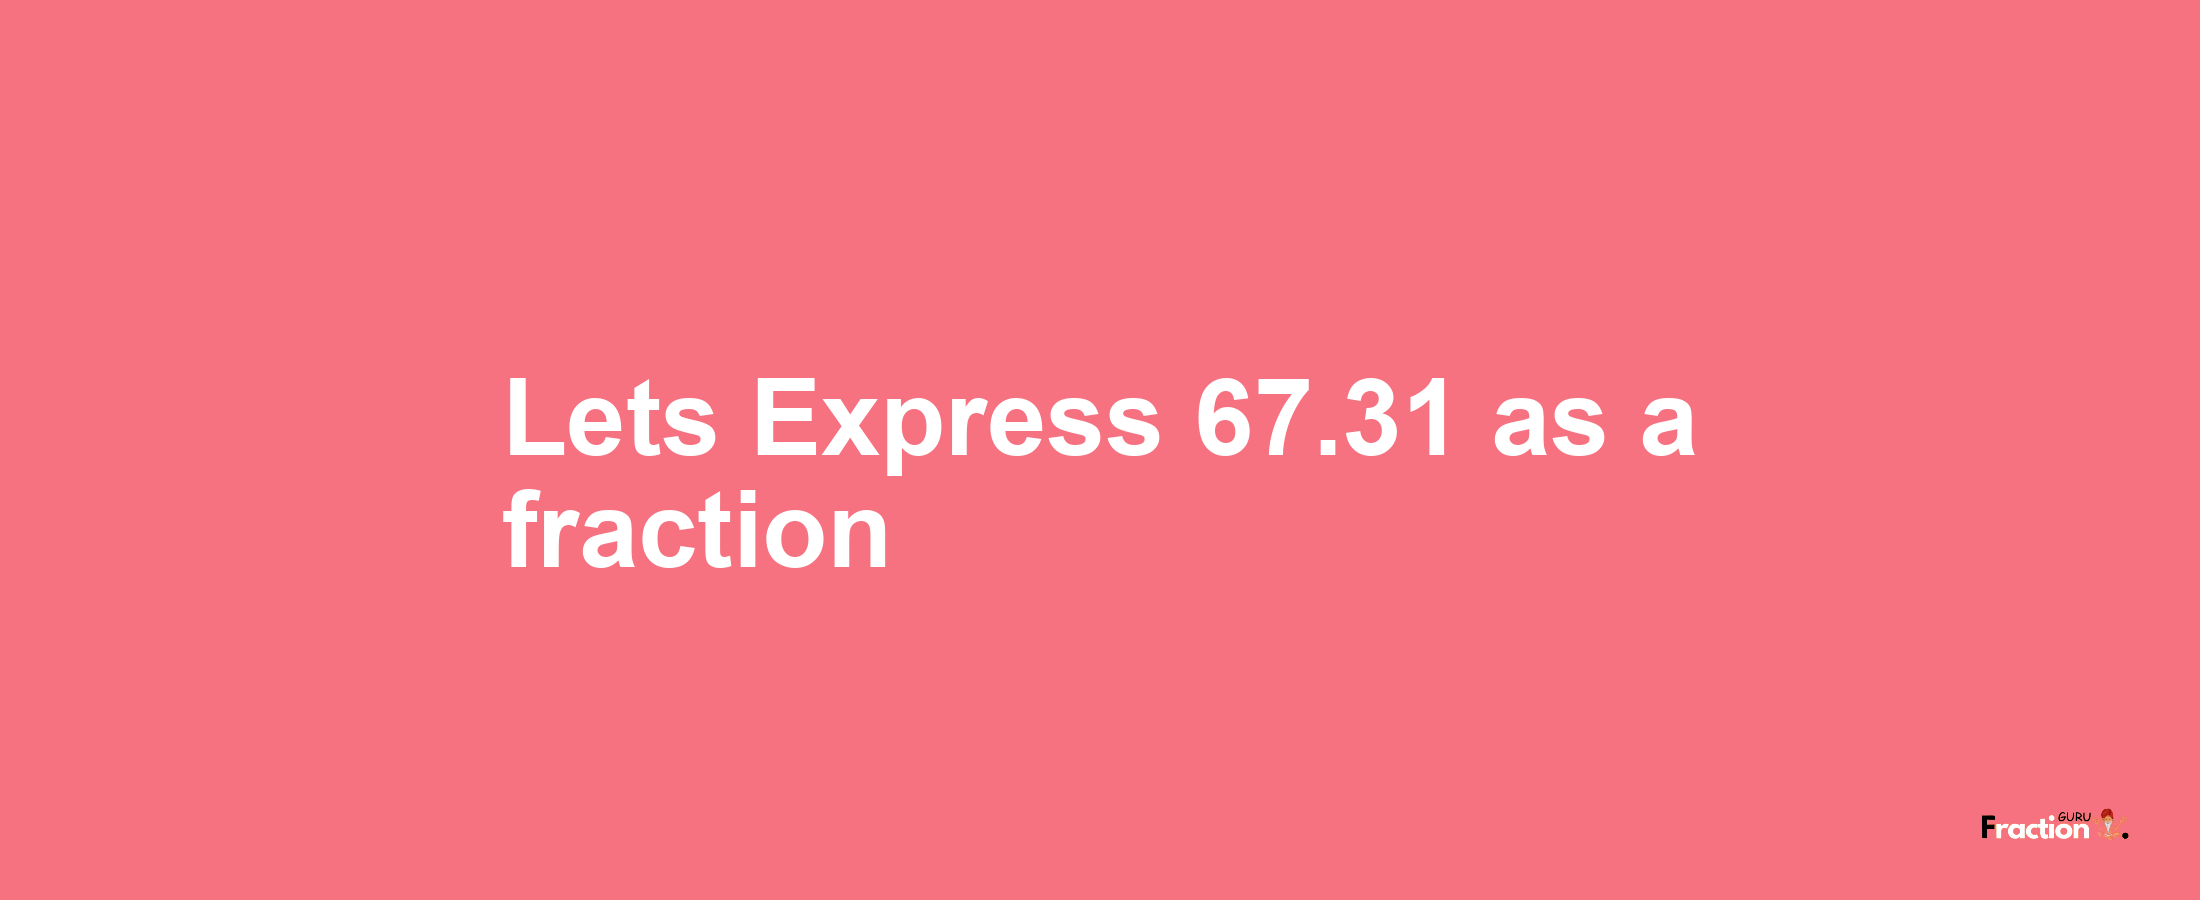 Lets Express 67.31 as afraction